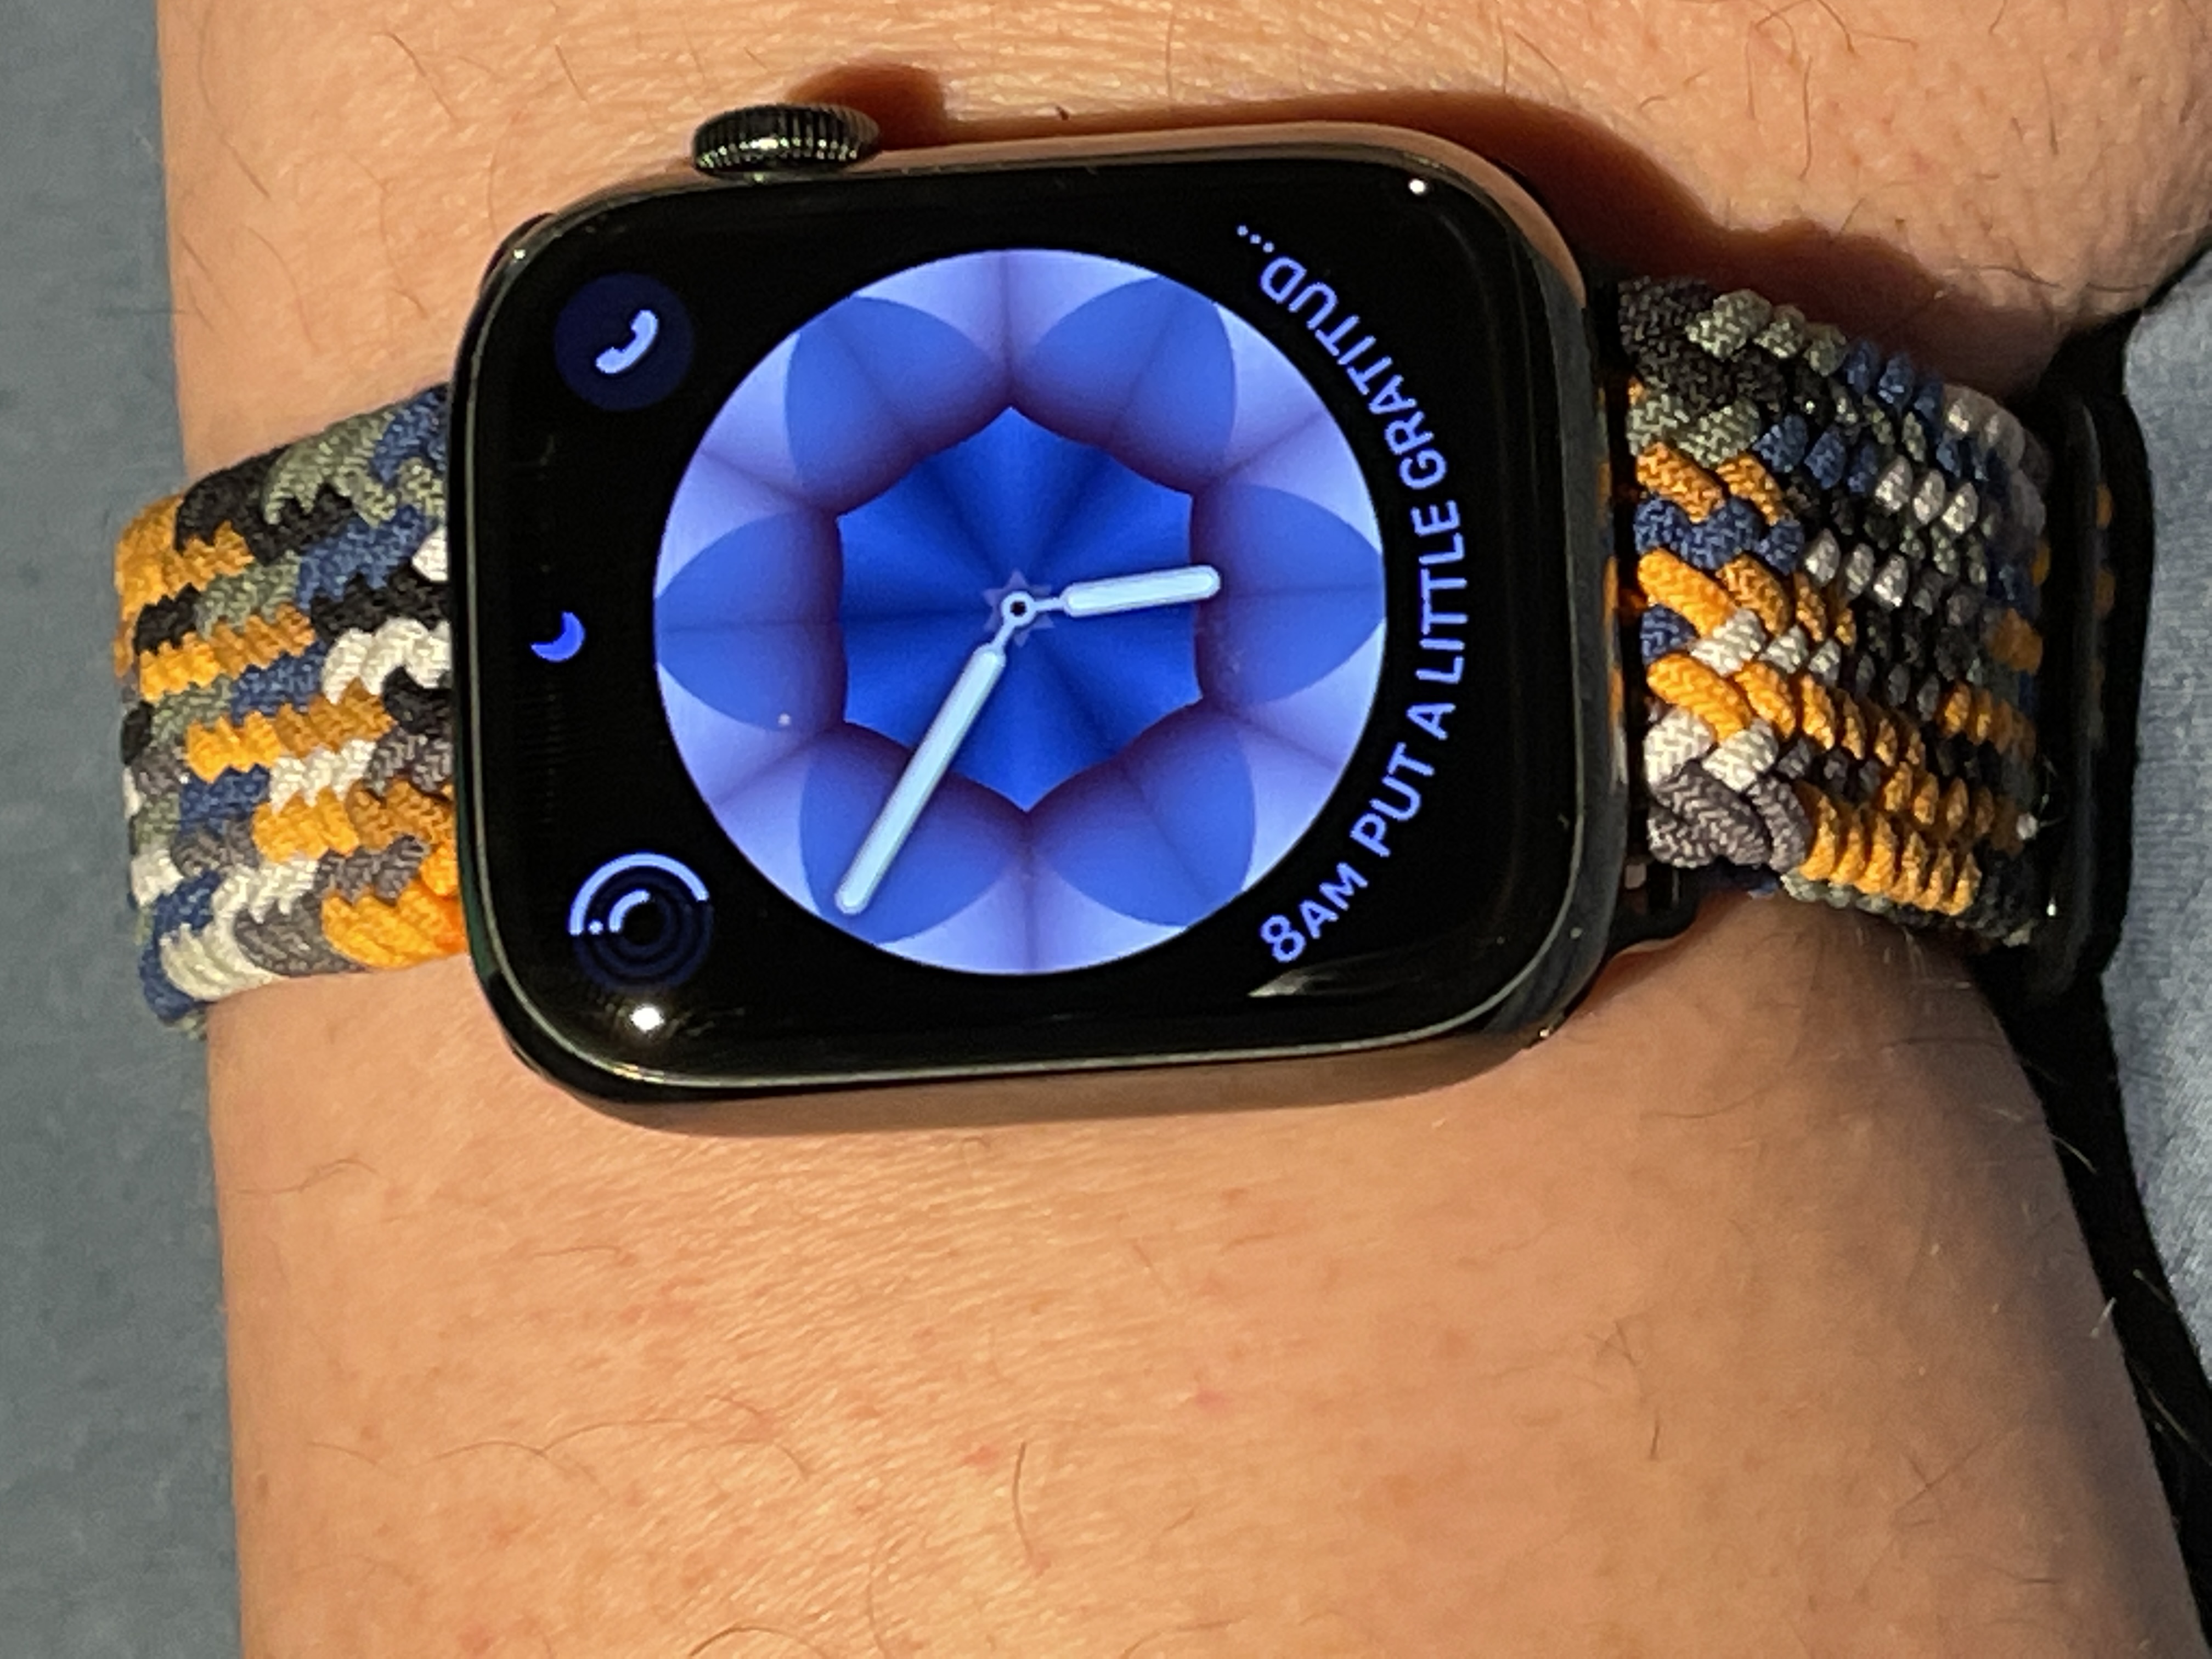 Stainless Steel Mesh Apple Watch Bands - Epic Watch Bands